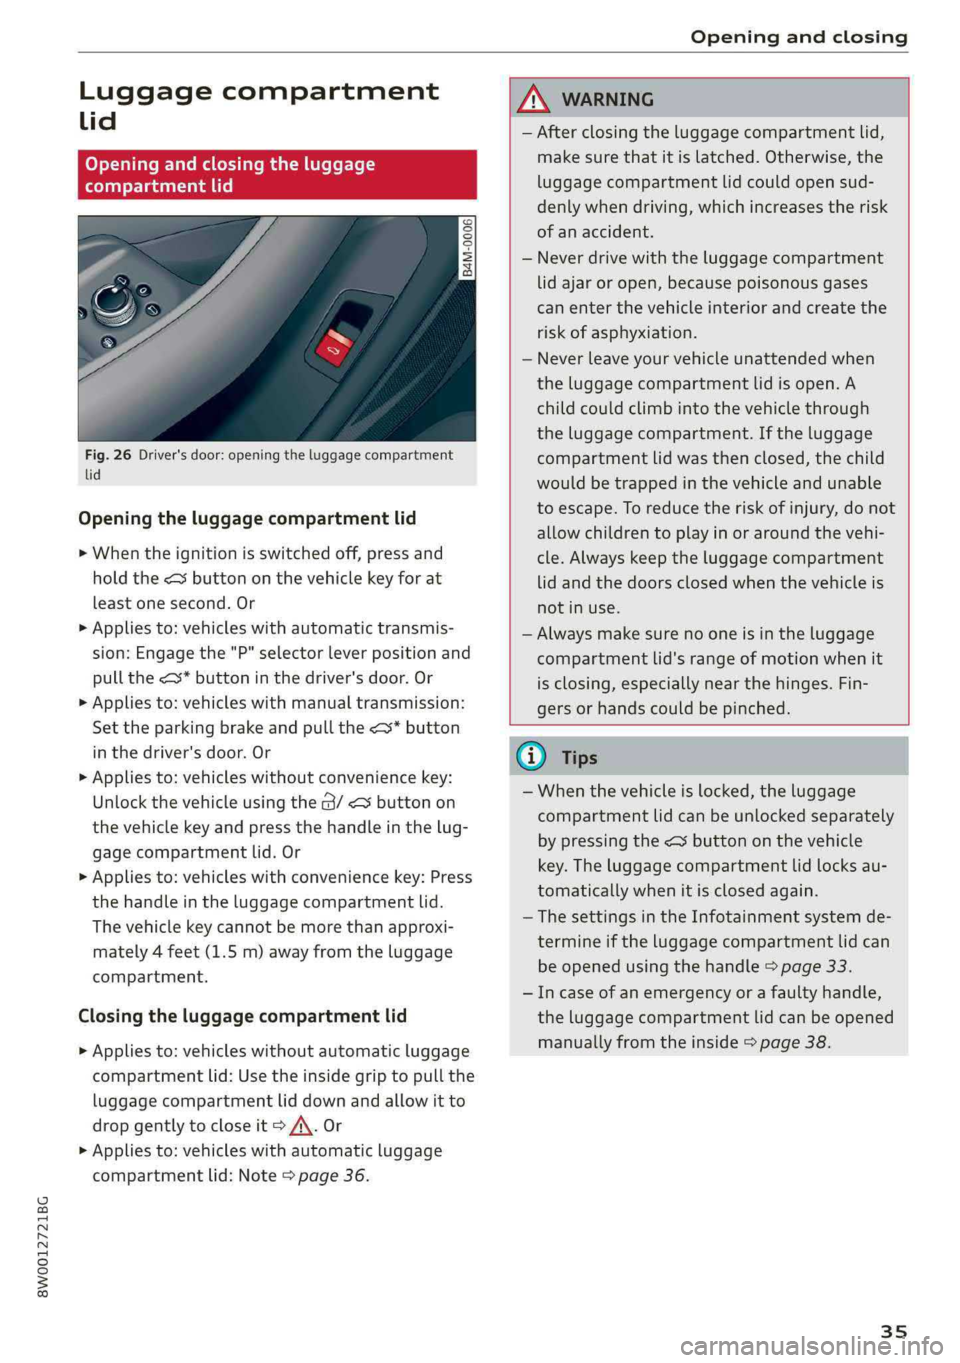 AUDI S4 2019 Owners Guide 8W0012721BG
Openingandclosing
 
Luggagecompartment
lid
Openingandclosingtheluggage
compartmentlid
eoS S 2
=zta
 
Fig.26Driver'sdoor:openingtheluggagecompartment
lid
Openingtheluggagecompartmentlid